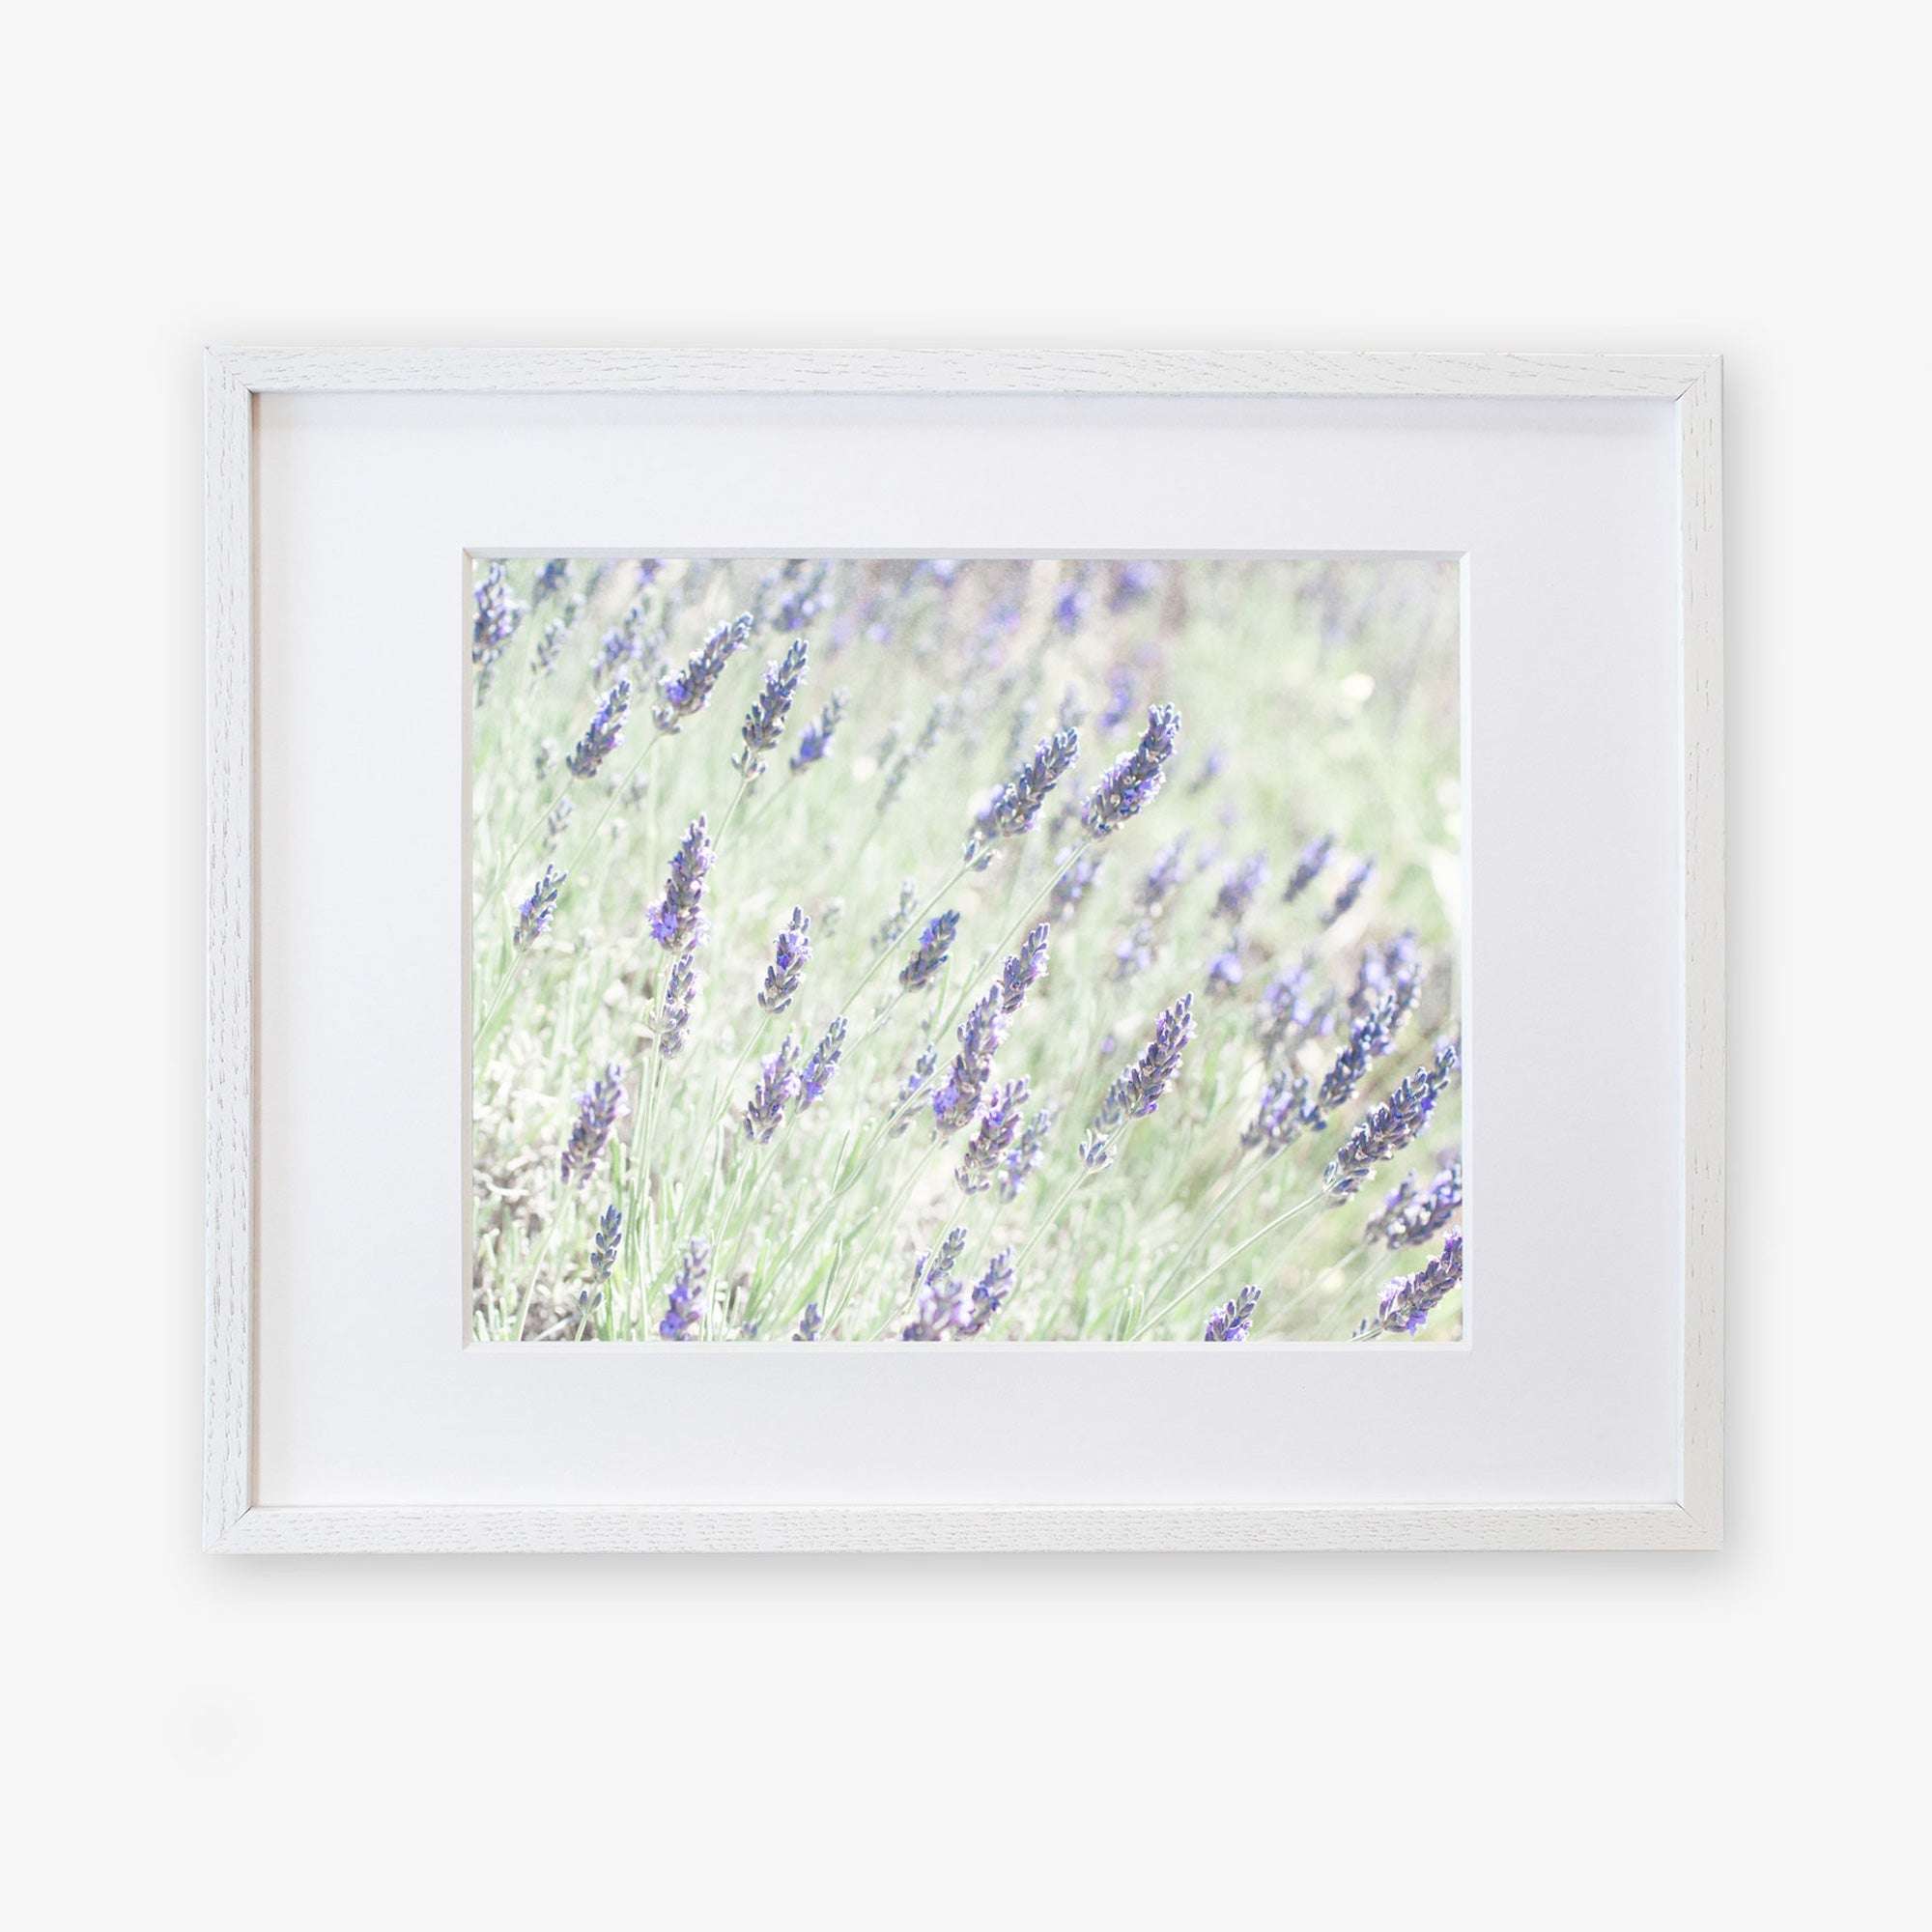 A framed photograph of a Floral Purple Print, &#39;Lavender for LaLa&#39; by Offley Green, depicting a lavender field focused on several violet lavender blossoms against a softly blurred green background. The frame is simple and white, printed on archival photographic paper.